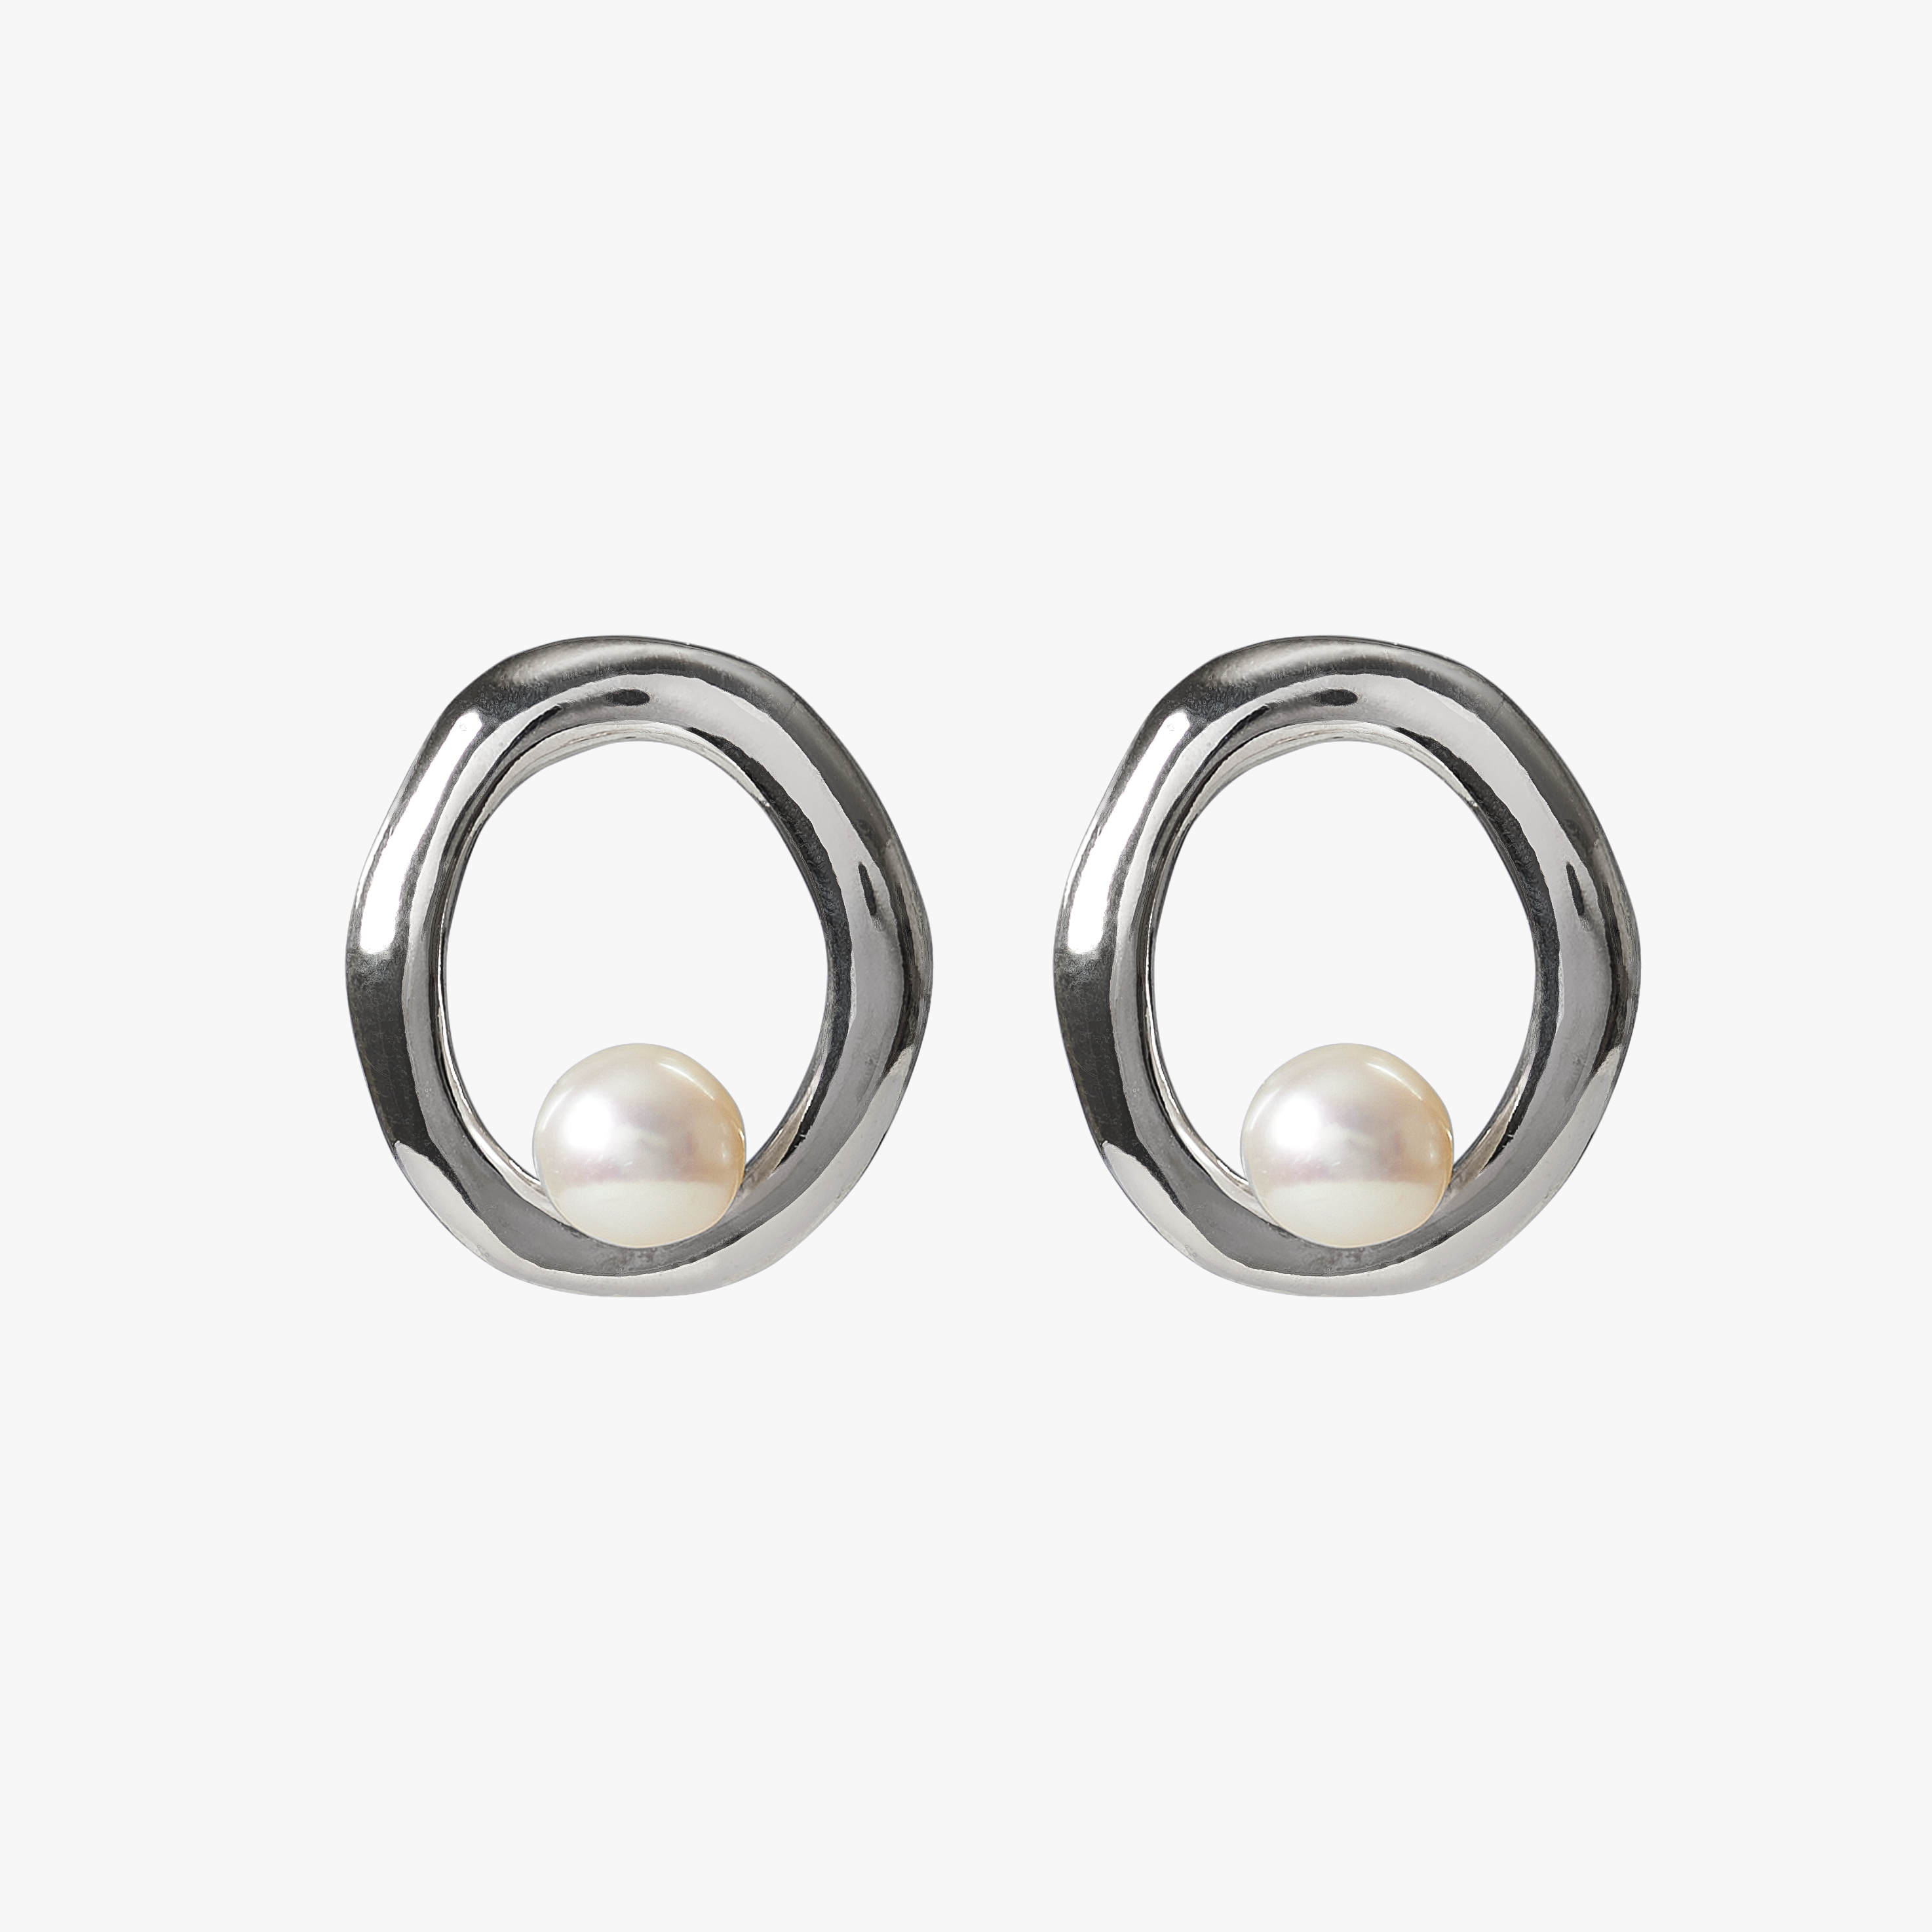 Pamplemousse Silver - Oceano Pearls